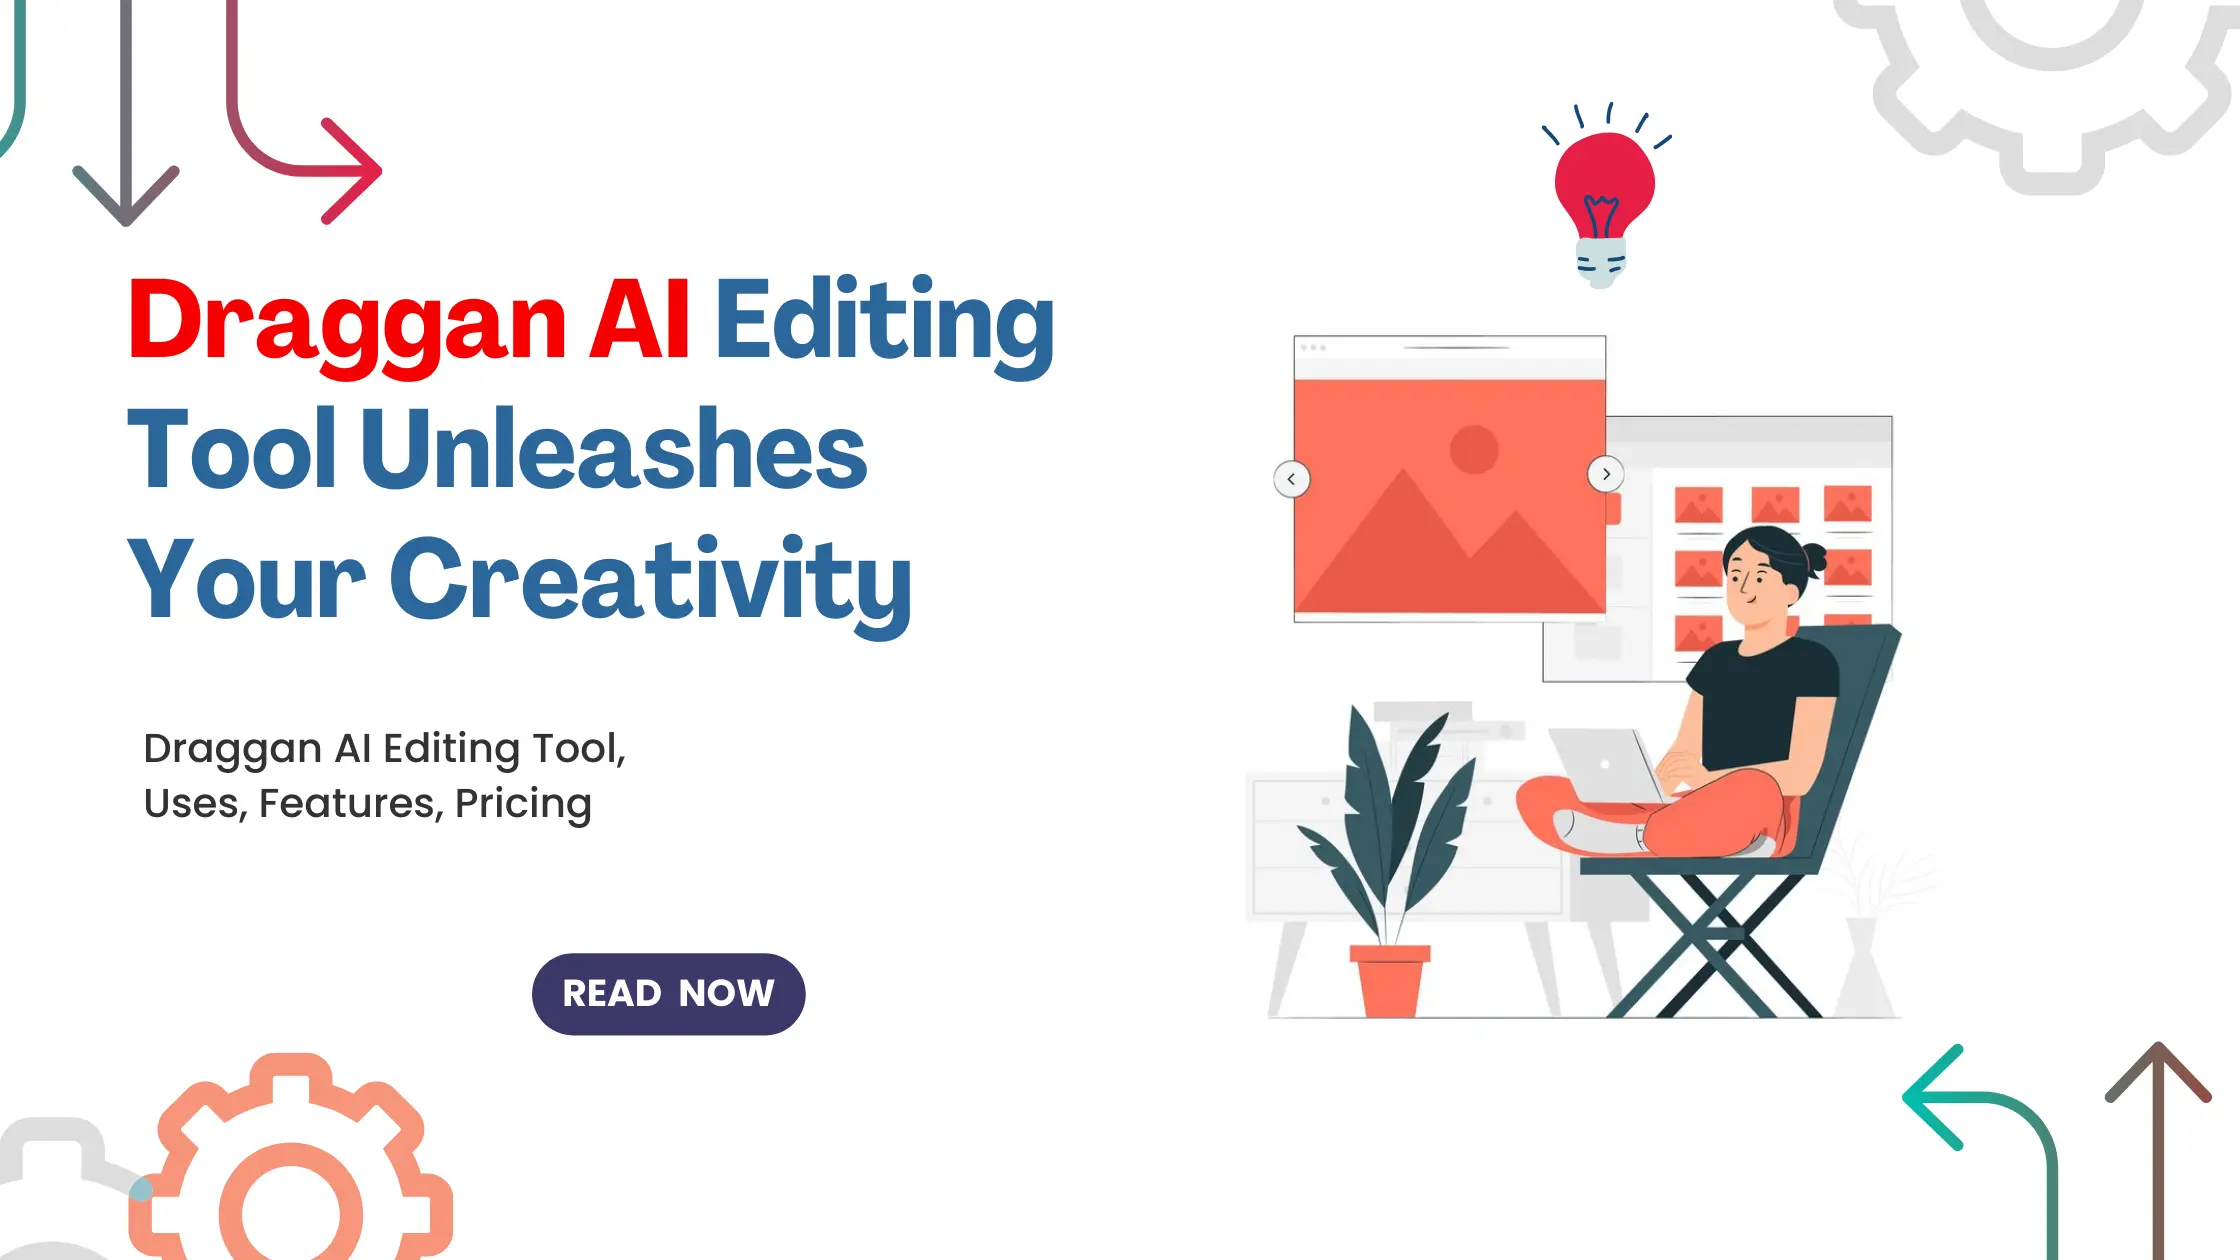 Draggan AI Editing Tool, Uses, Features, Pricing